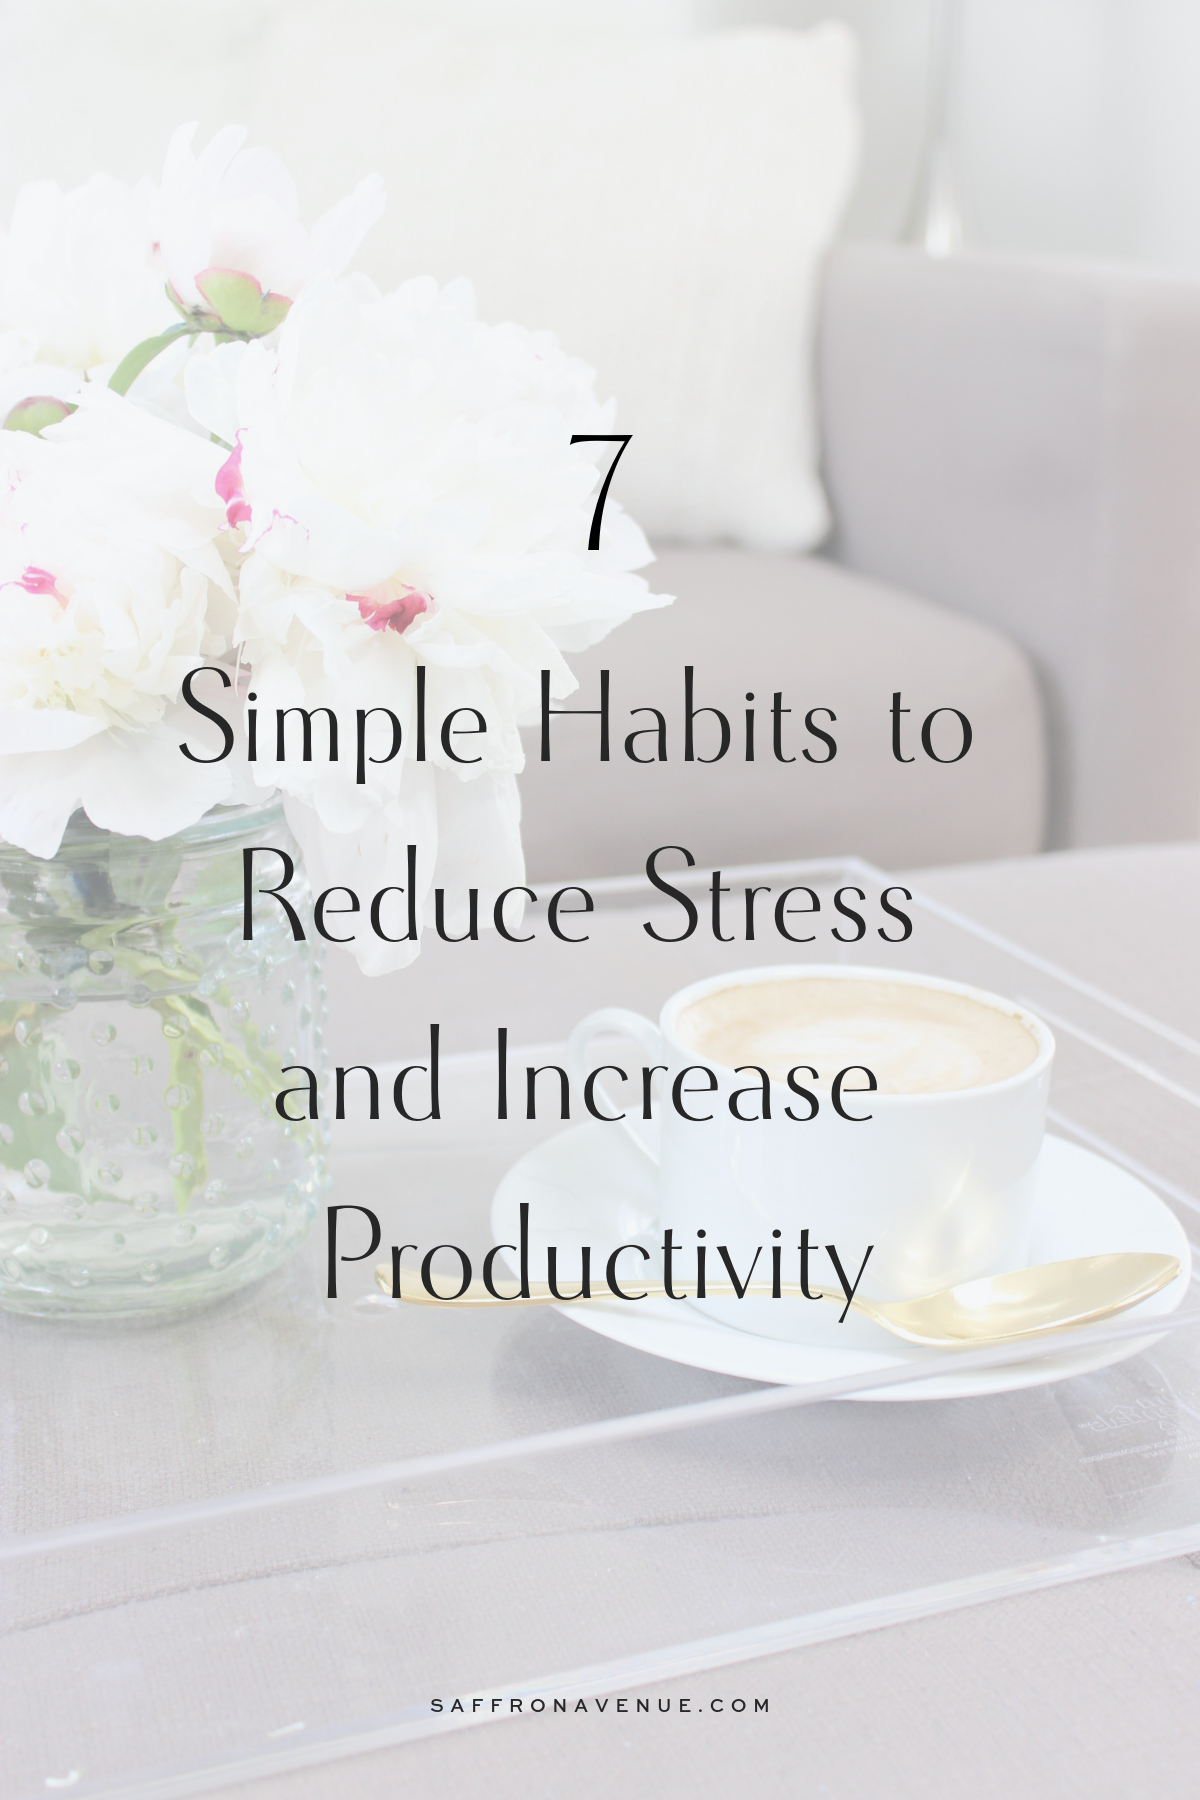 How to Reduce Stress and Improve Productivity